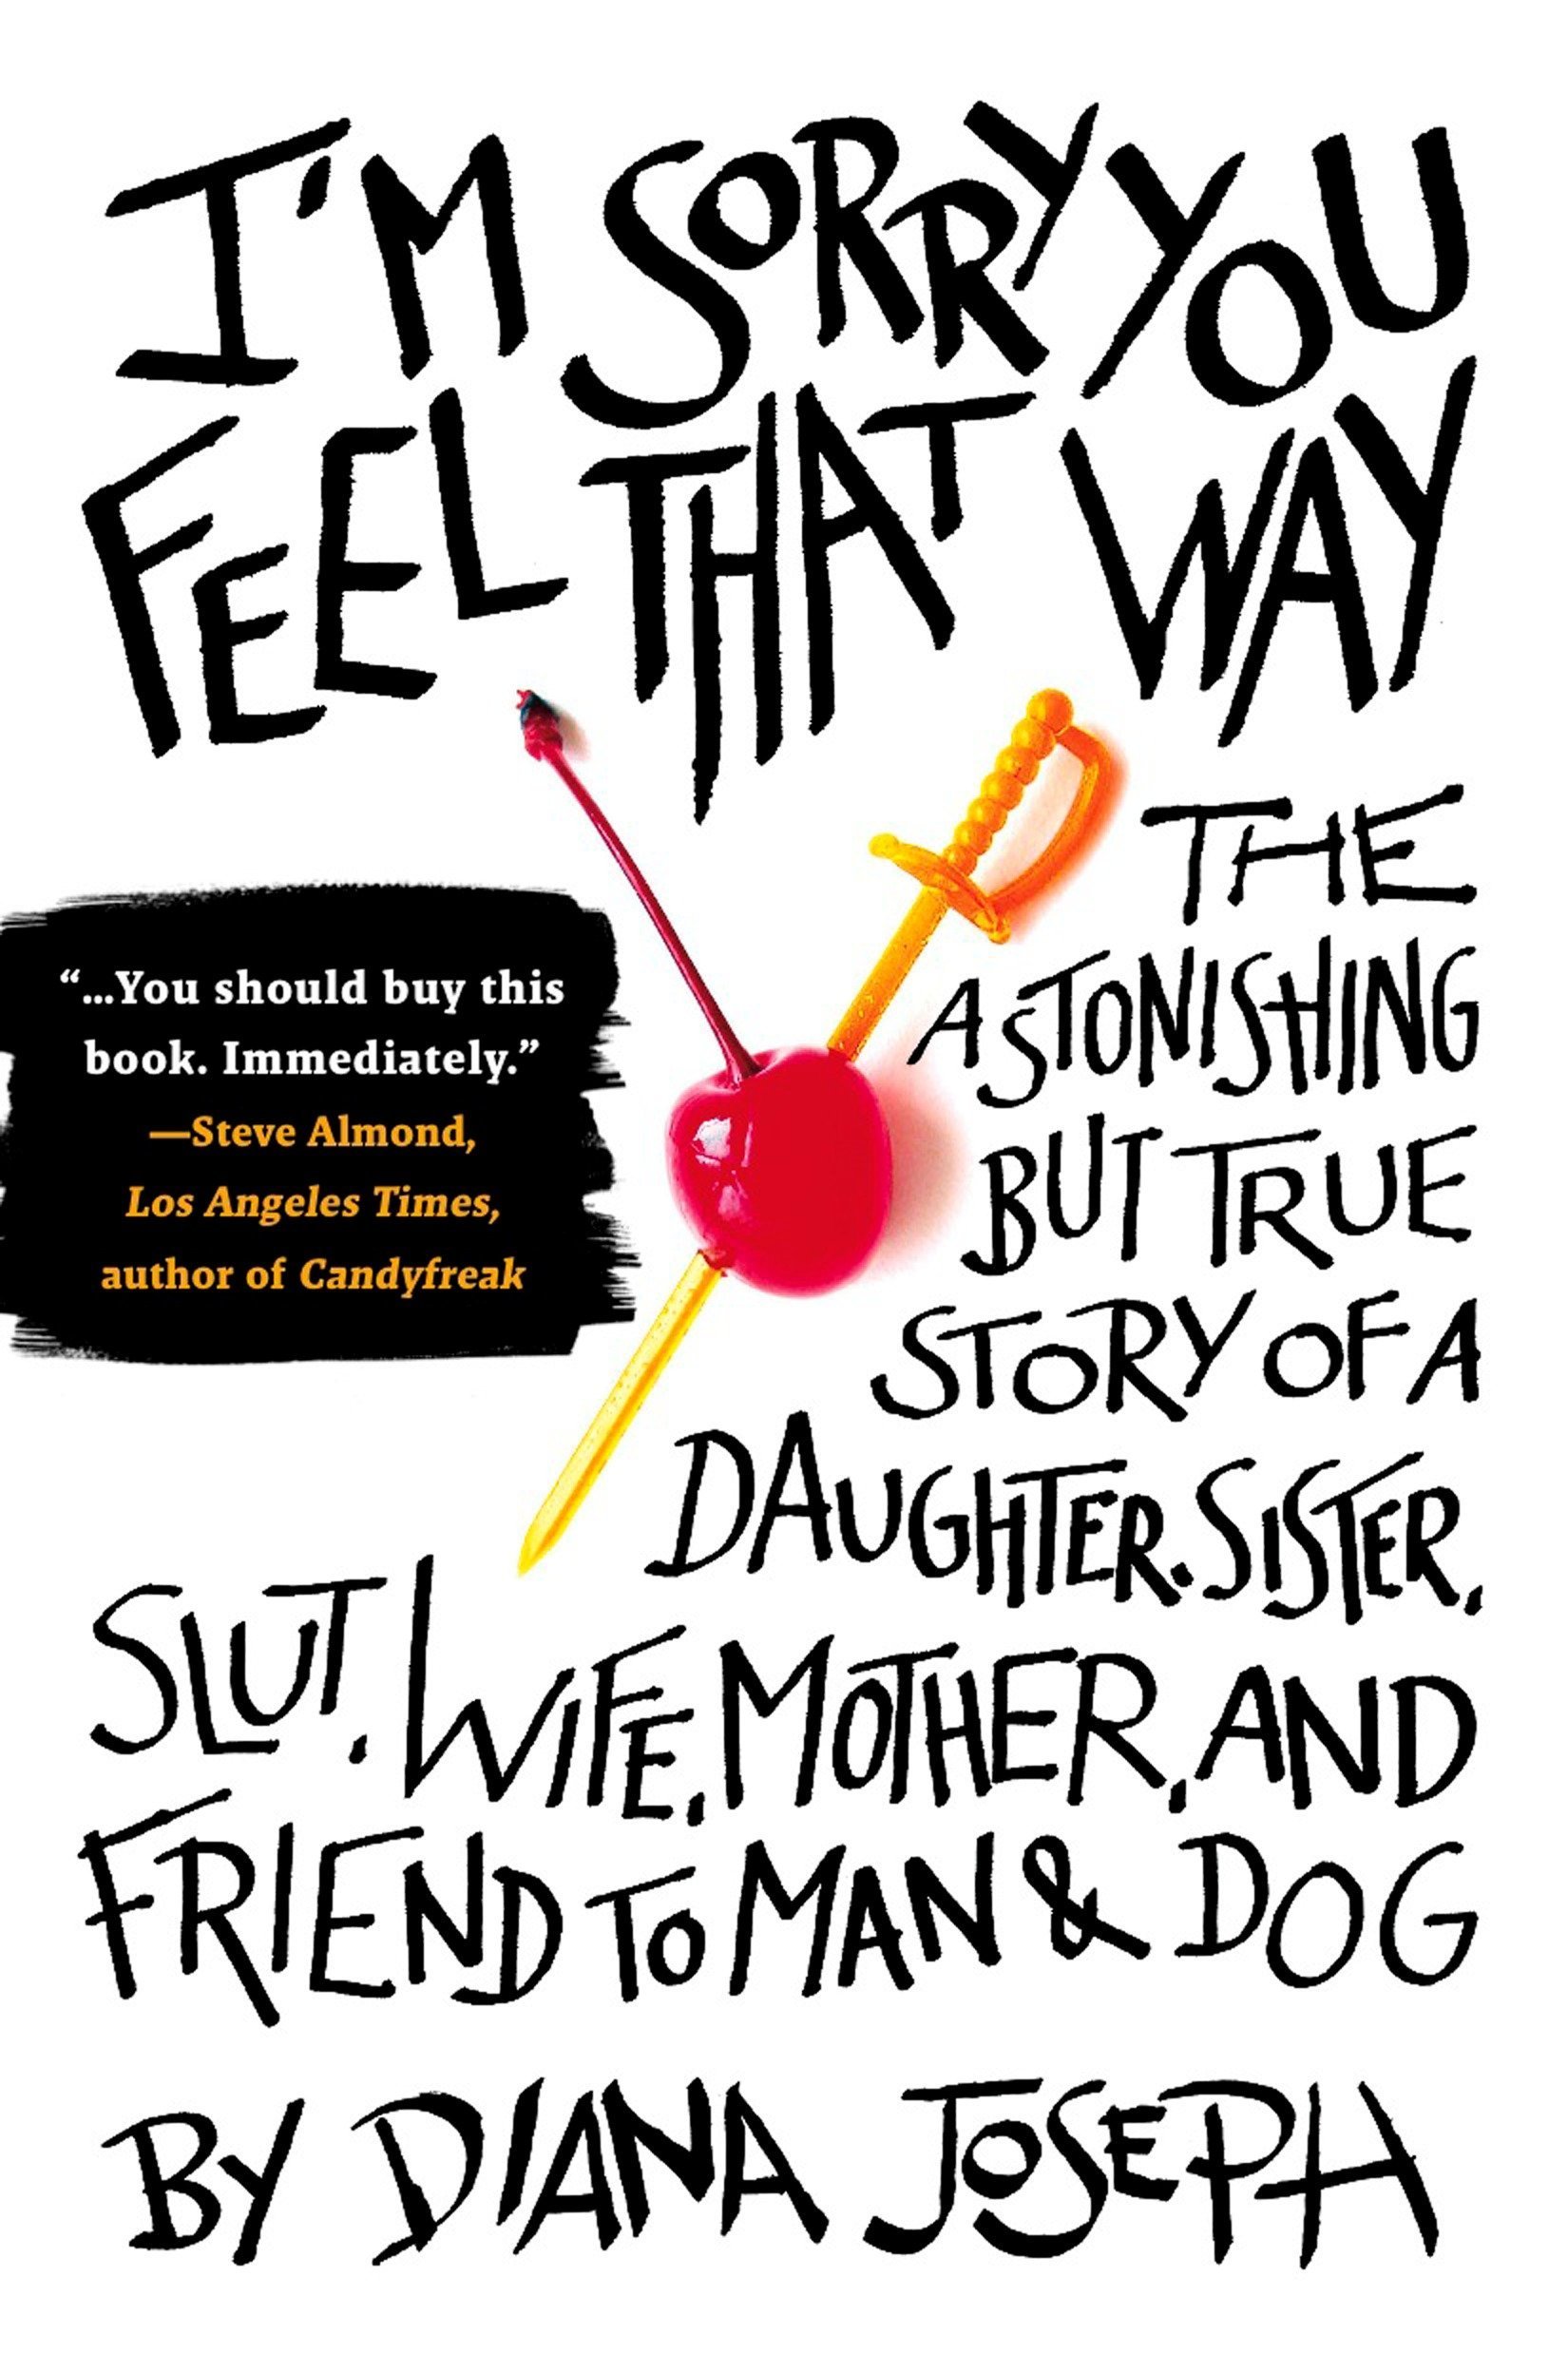 I'm Sorry You Feel That Way: The Astonishing but True Story of a Daughter, Sister, Slut,Wife, Mother, and Fri end to Man and Dog